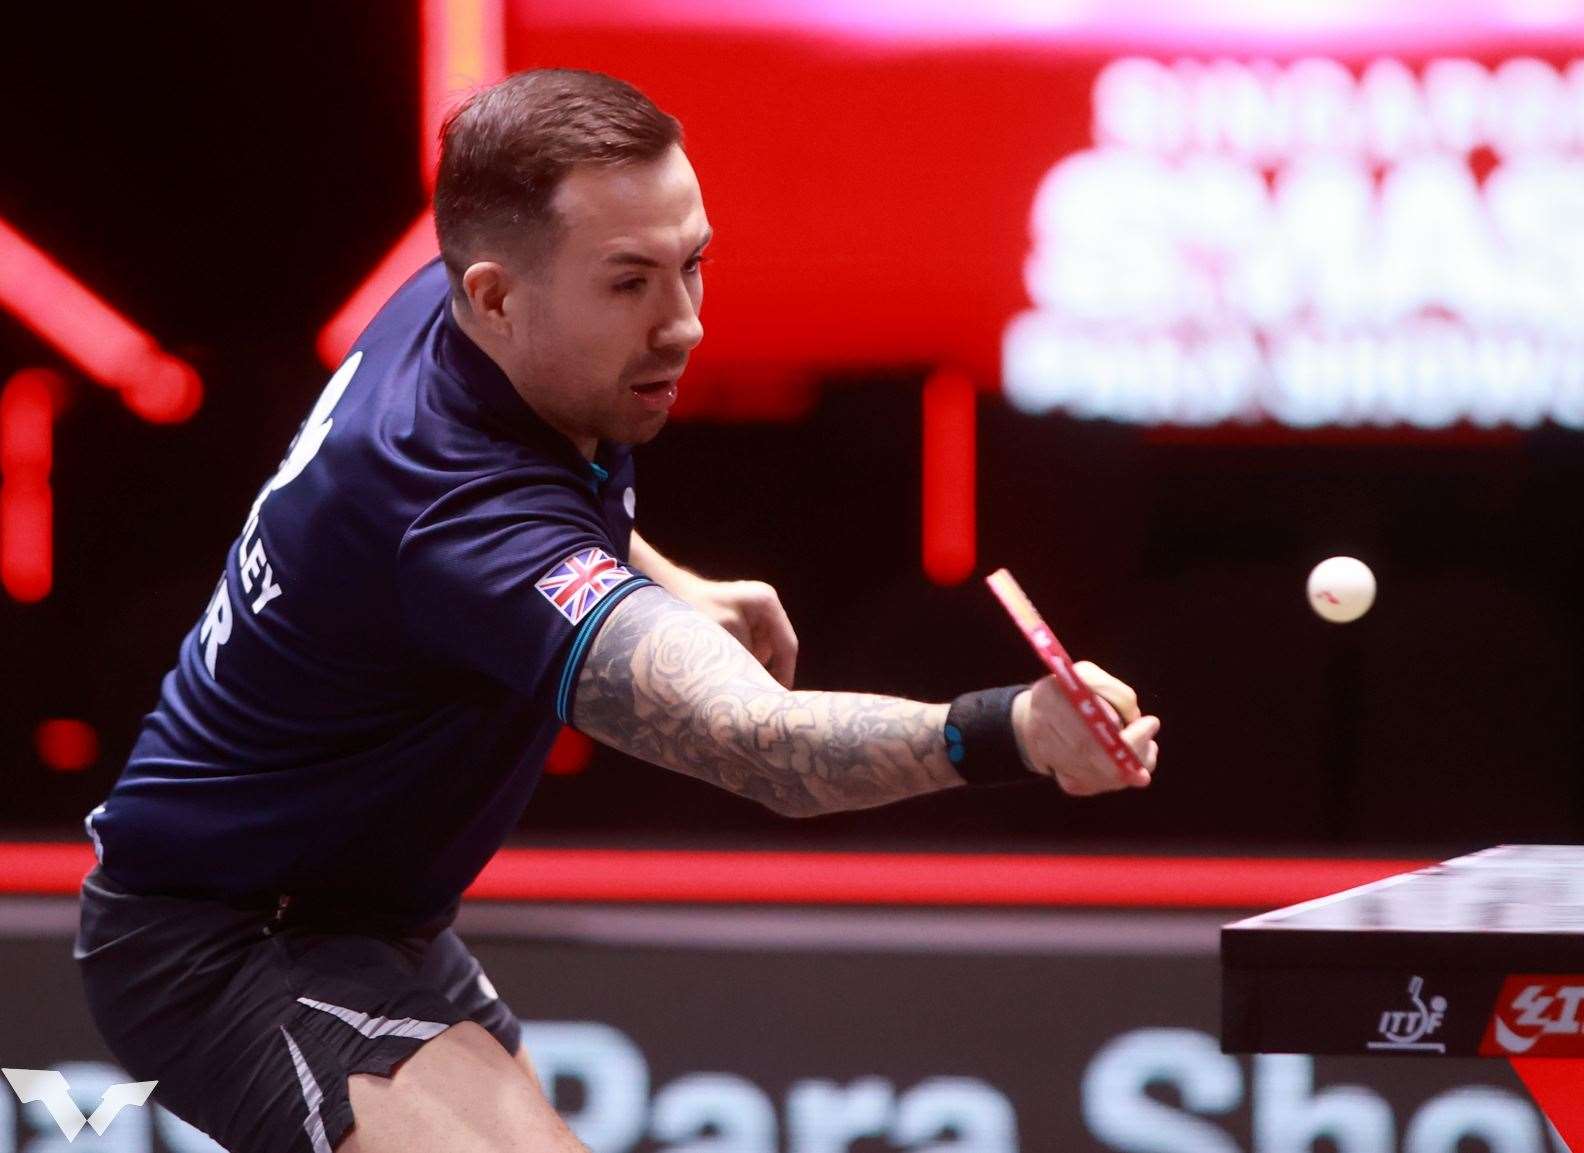 Tunbridge Wells' Will Bayley in action at the table during the Singapore Smash. Picture: World Table Tennis